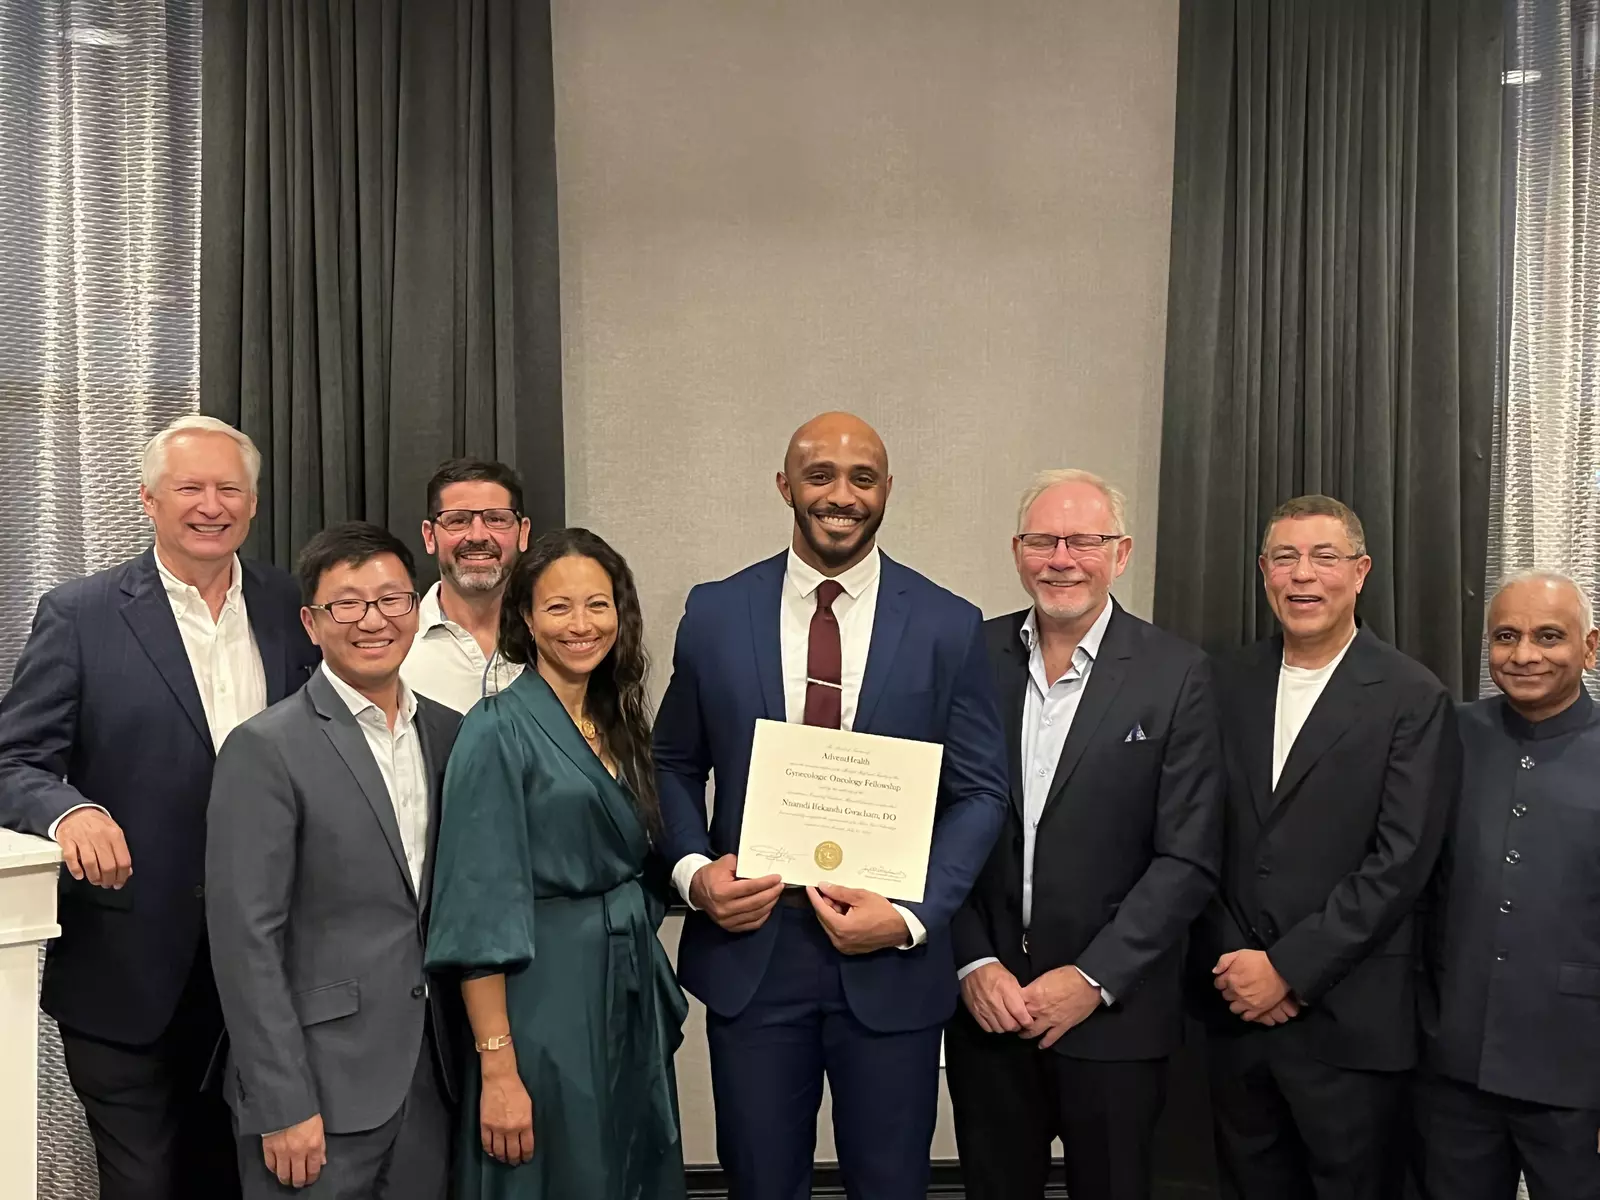 Dr. Nnamdi Gwacham graduates from the AdventHealth Gynecologic Oncology Fellowship Program in July 2023 where Dr. McKenzie is the program director.